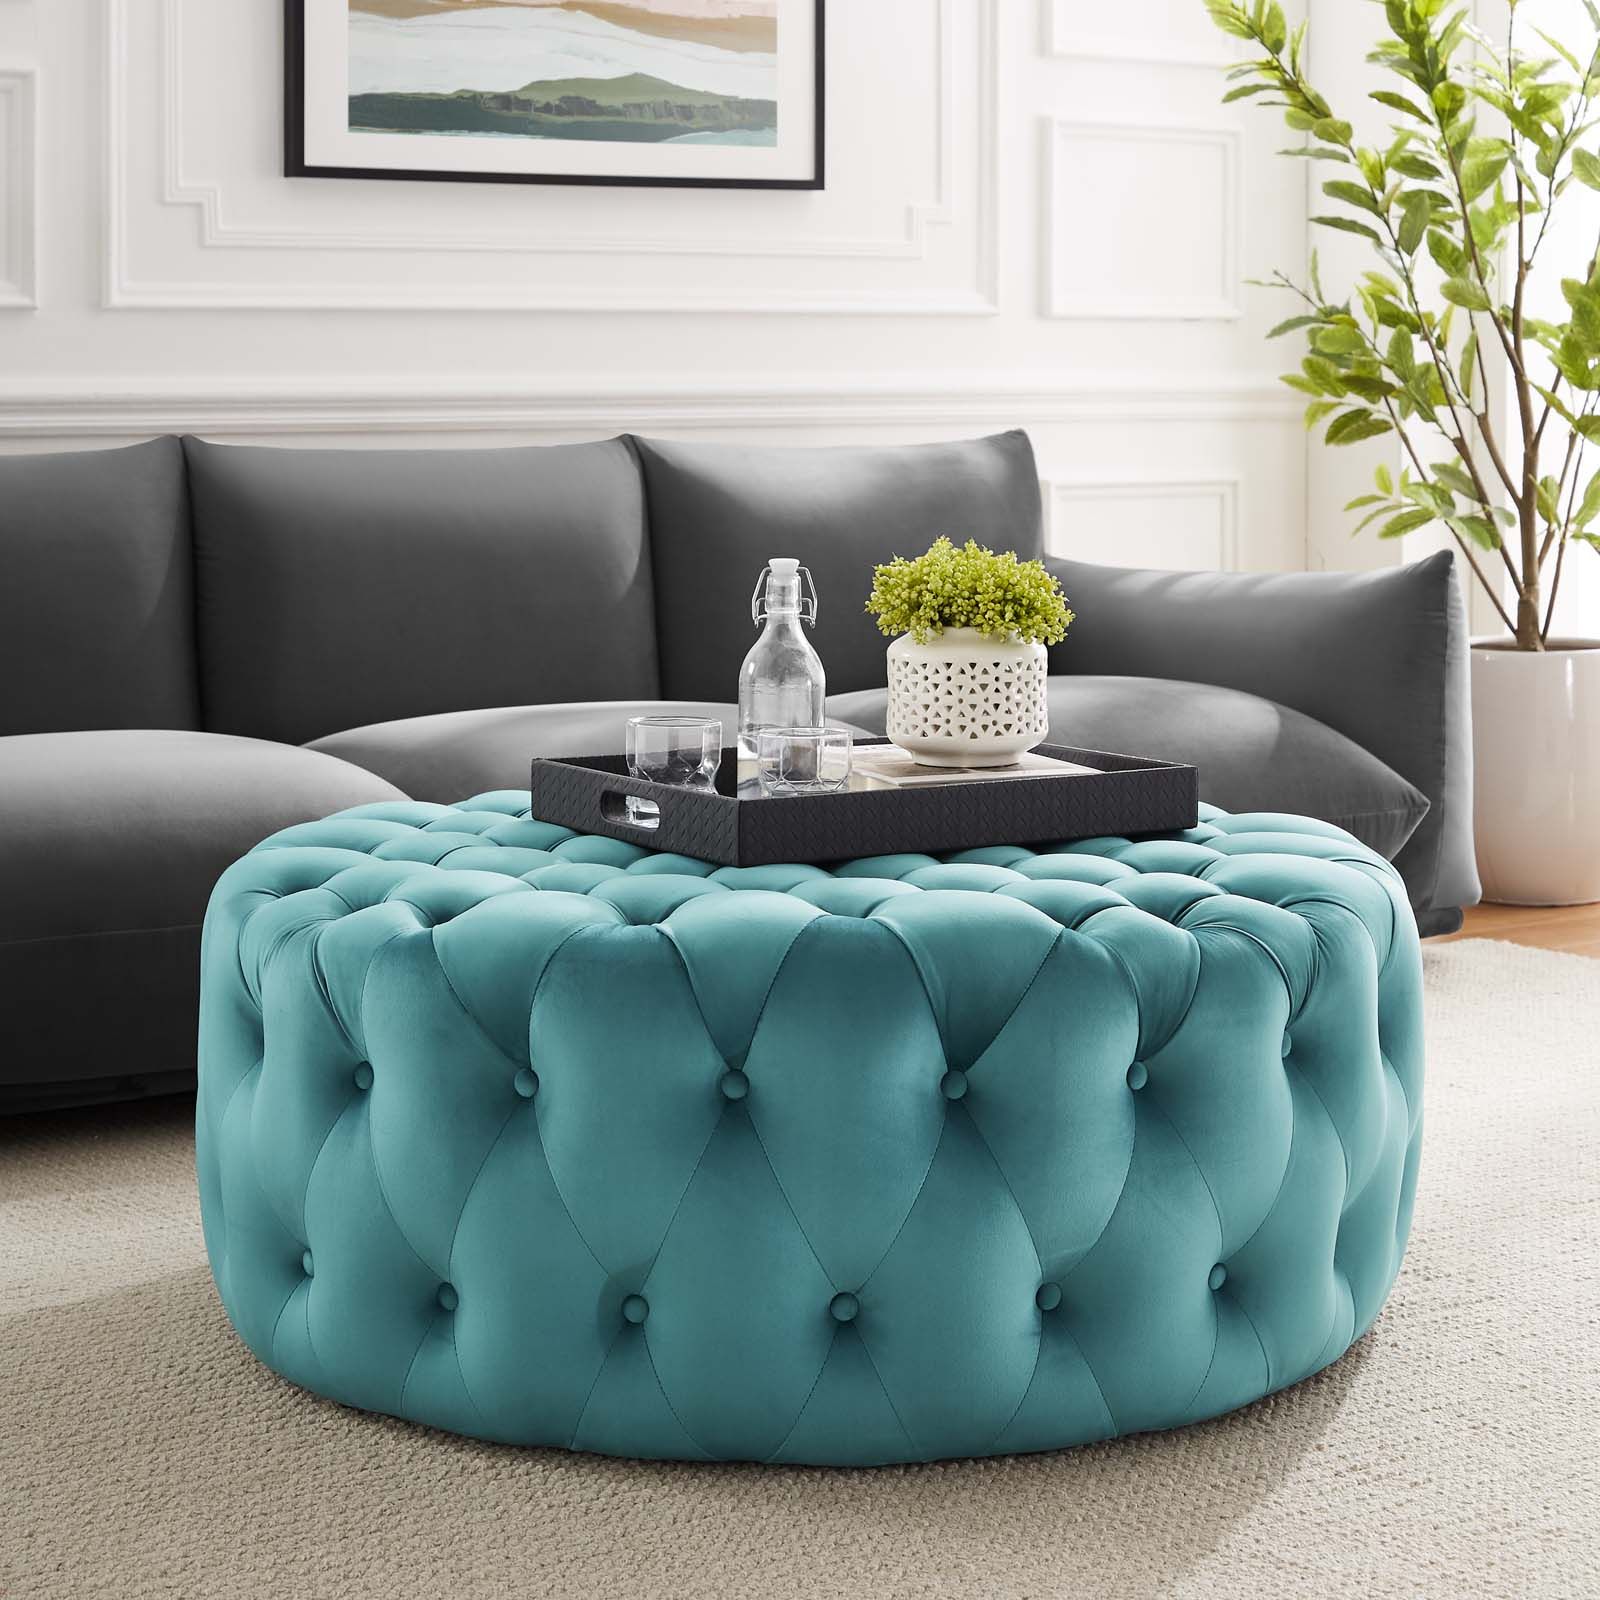 2017 Ivory Velvet Totally Tufted Round Ottoman Coffee Table With Regard To Ivory And Blue Ottomans (View 6 of 10)